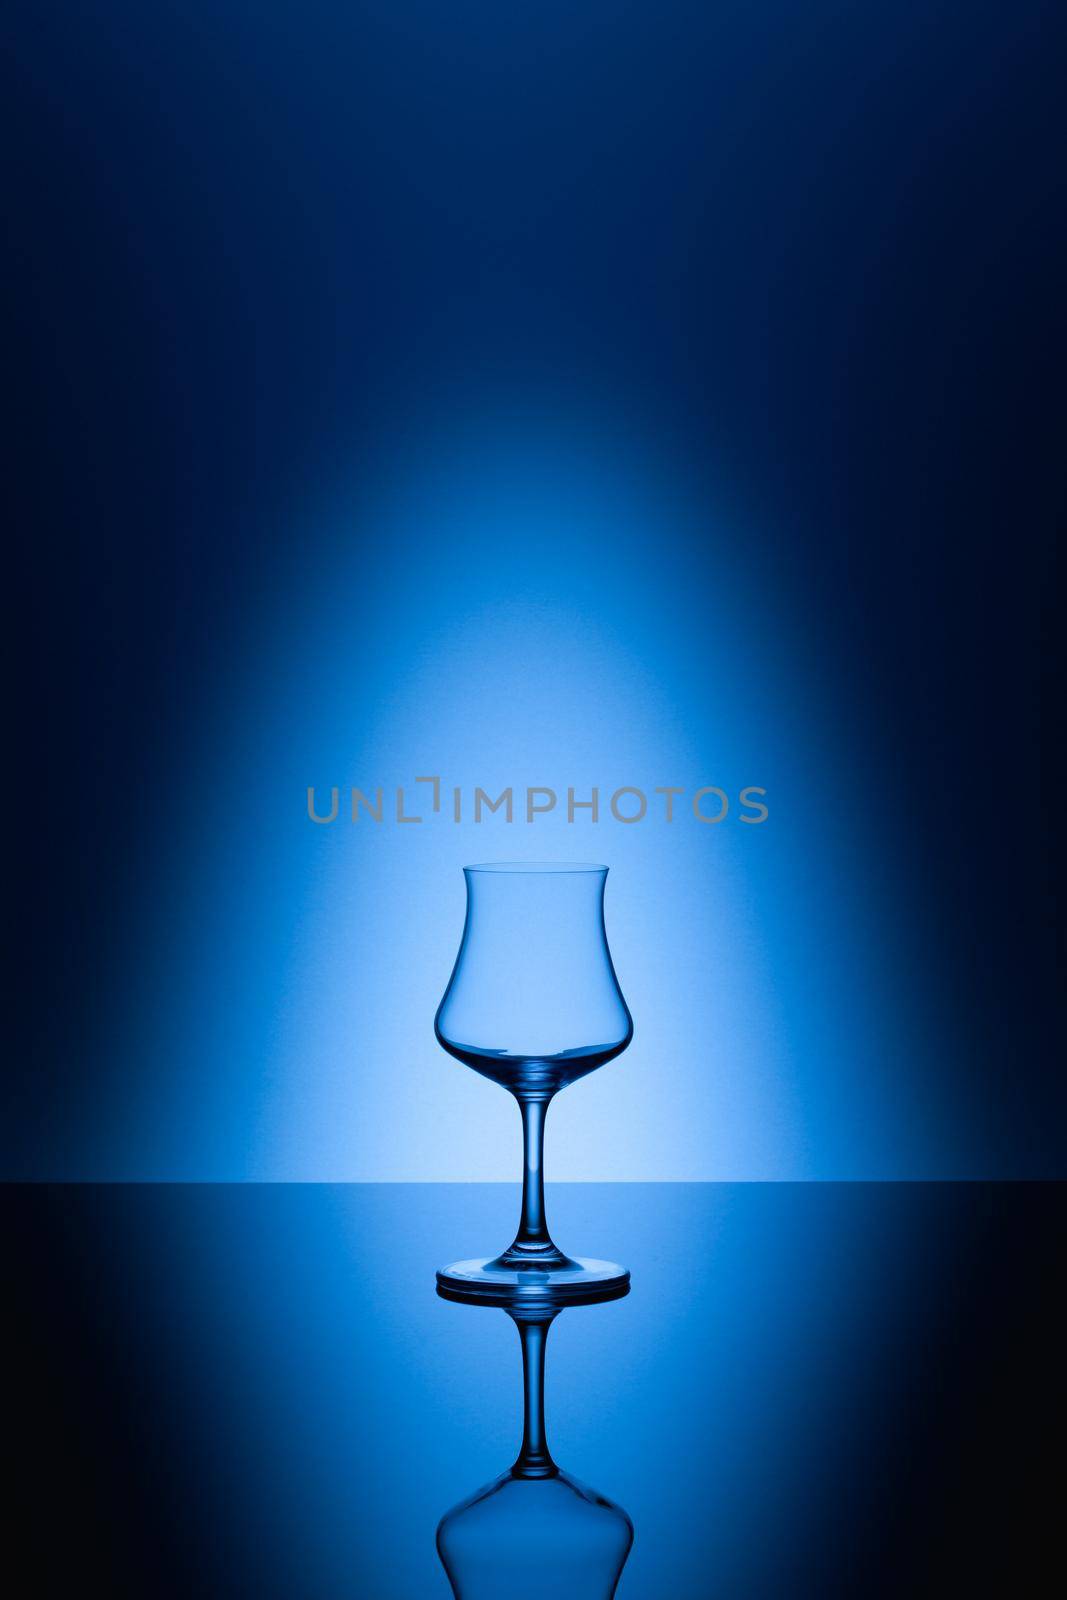 Rum tasting glass on the glass table and blue background